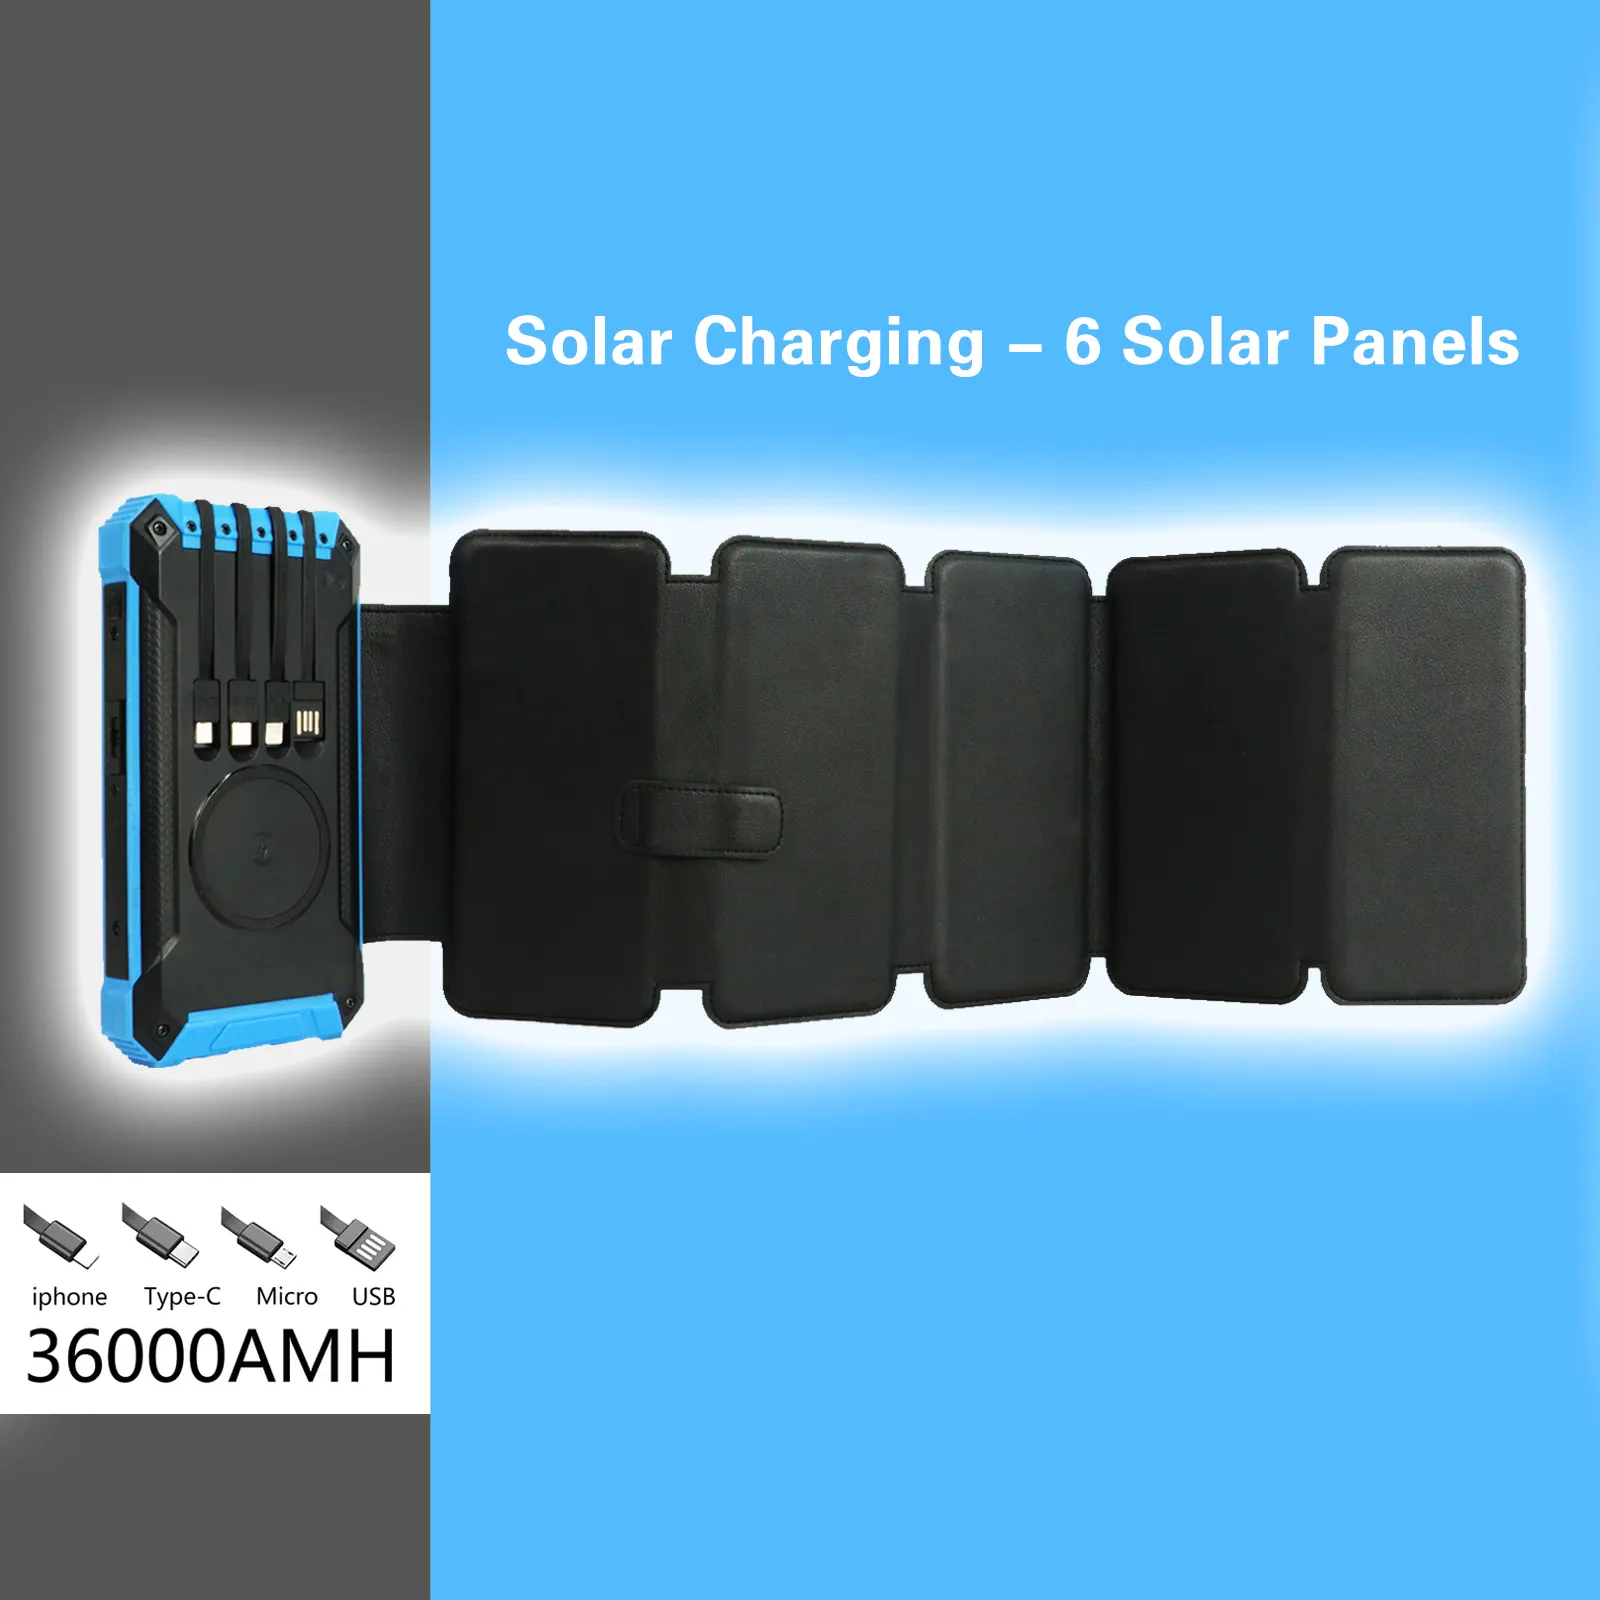 Portable outdoor solar power bank 36000mah - wireless high quality large capacity solar charger solar powerbank with solar panel